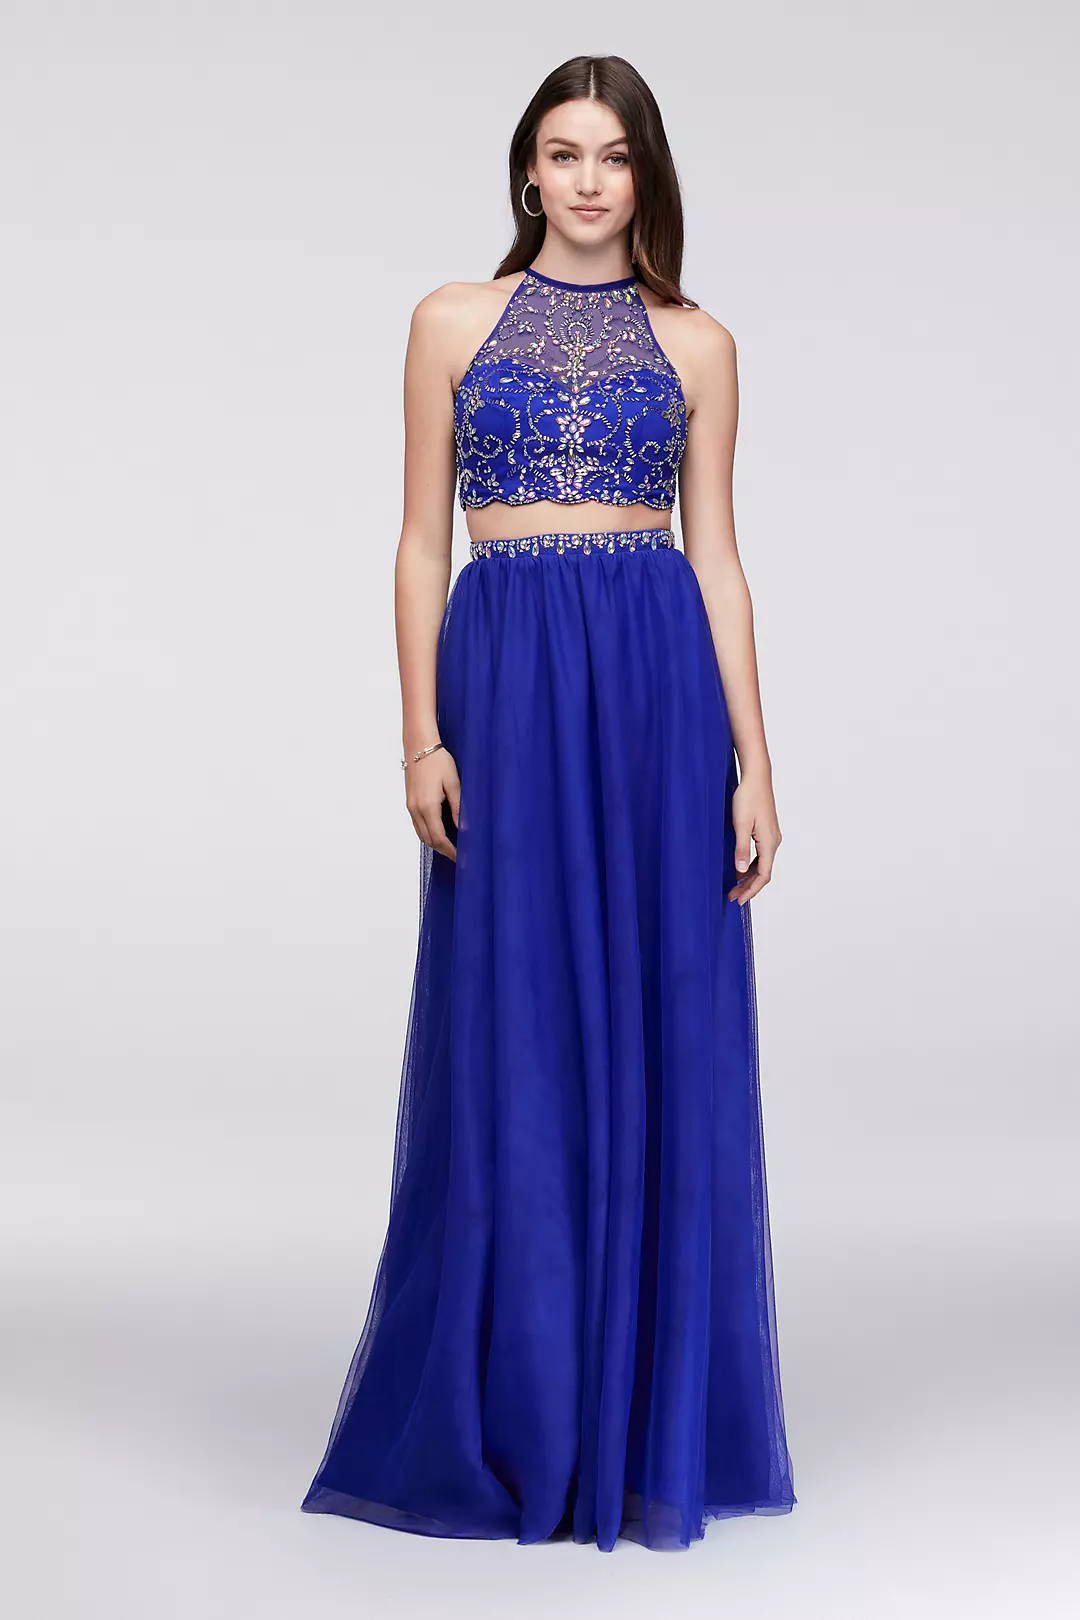 Crystal-Beaded Crop Top and Tulle Skirt Set Image